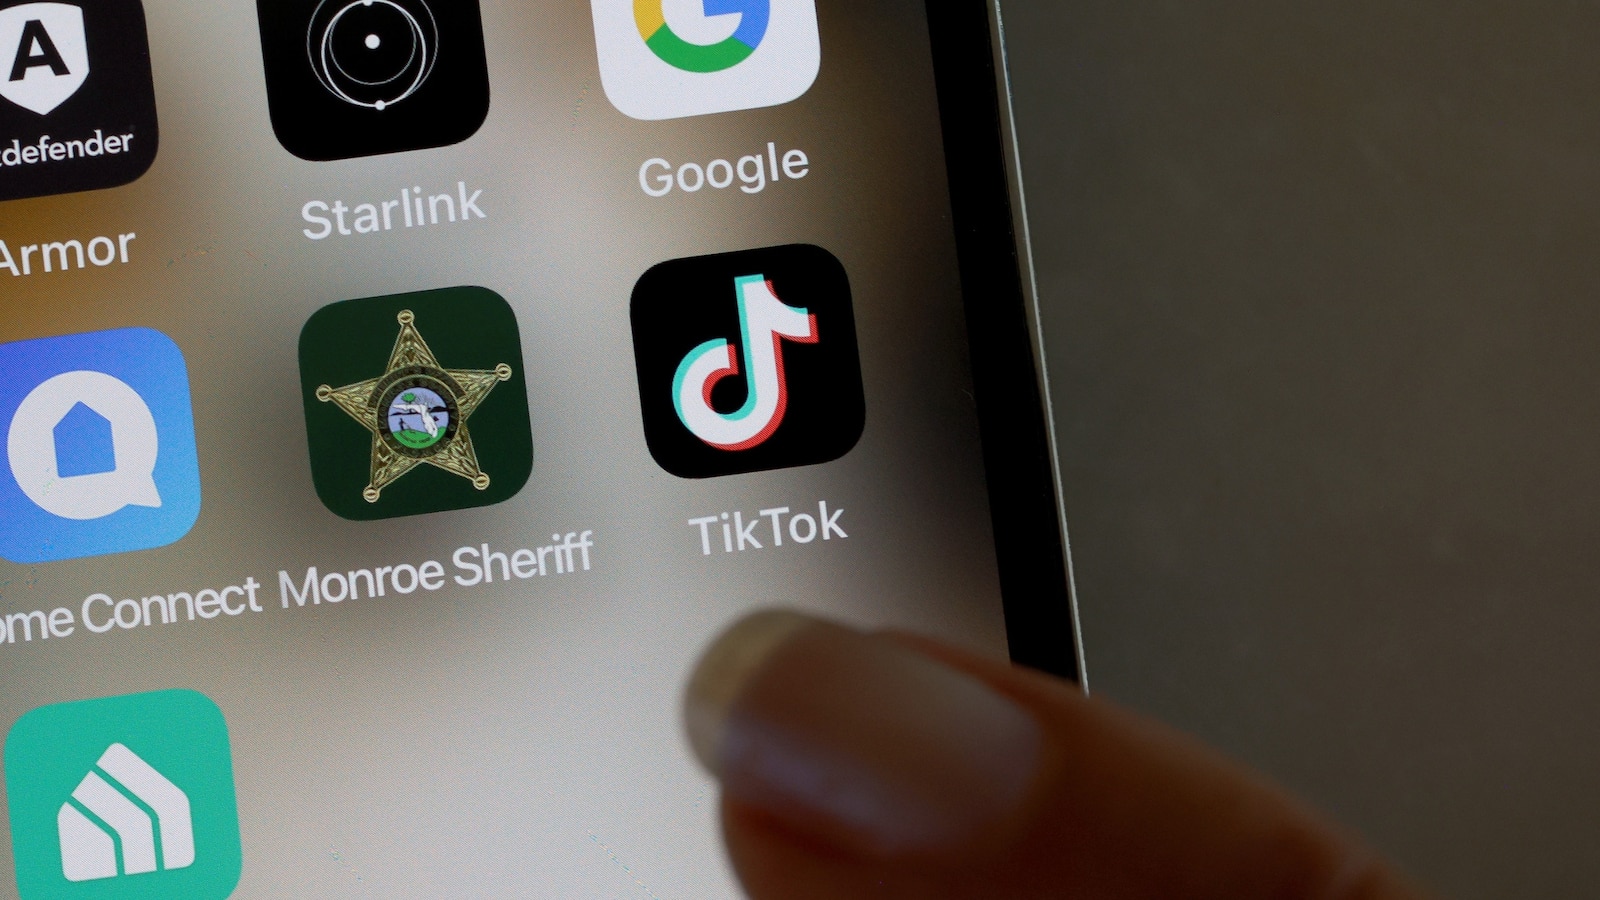 More people support than oppose a TikTok ban; frequent users, young adults push back: POLL [Video]